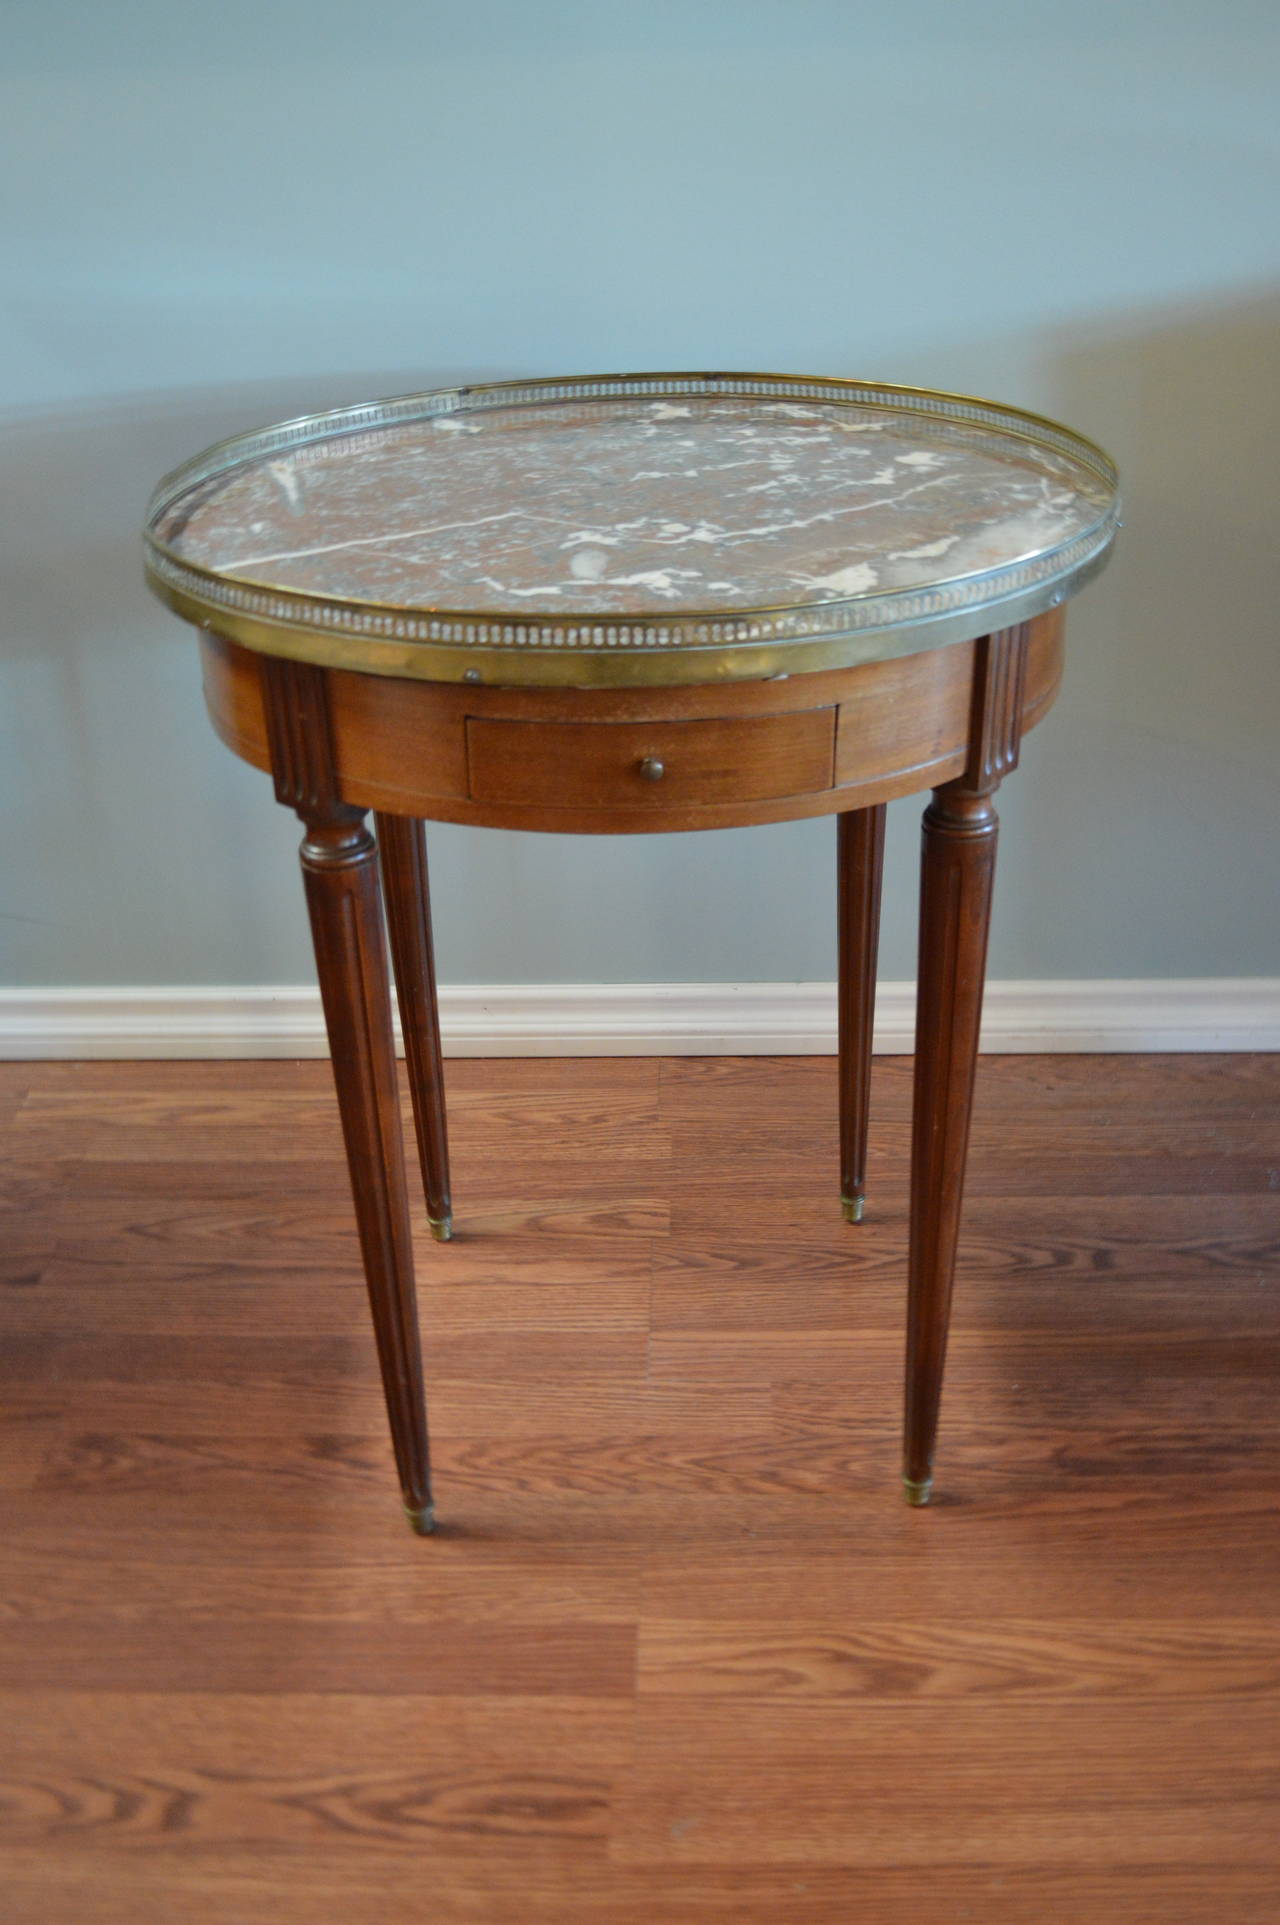 Louis XVI style mahogany bouillotte table with a very nice original marble top.
There is a bronze gallery and there are two small drawers and two small pull side tables with leather top. Four elegant fluted Louis XVI style legs.